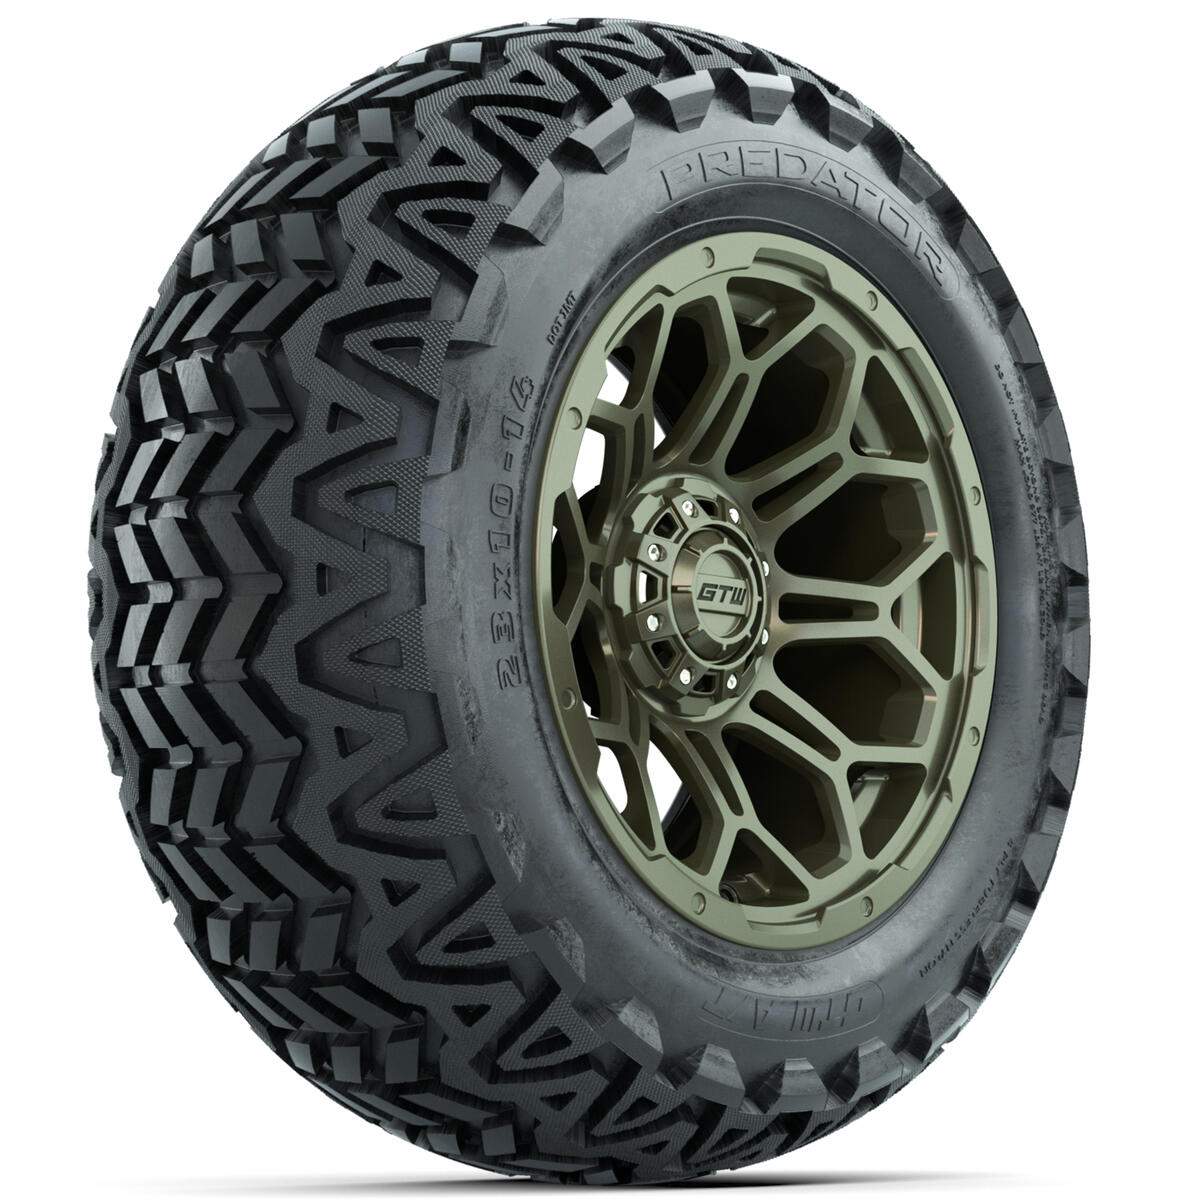 Set of 4 14"in GTW Bravo Wheels with 23x10-14"GTW Predator All-Terrain Tires A19-723